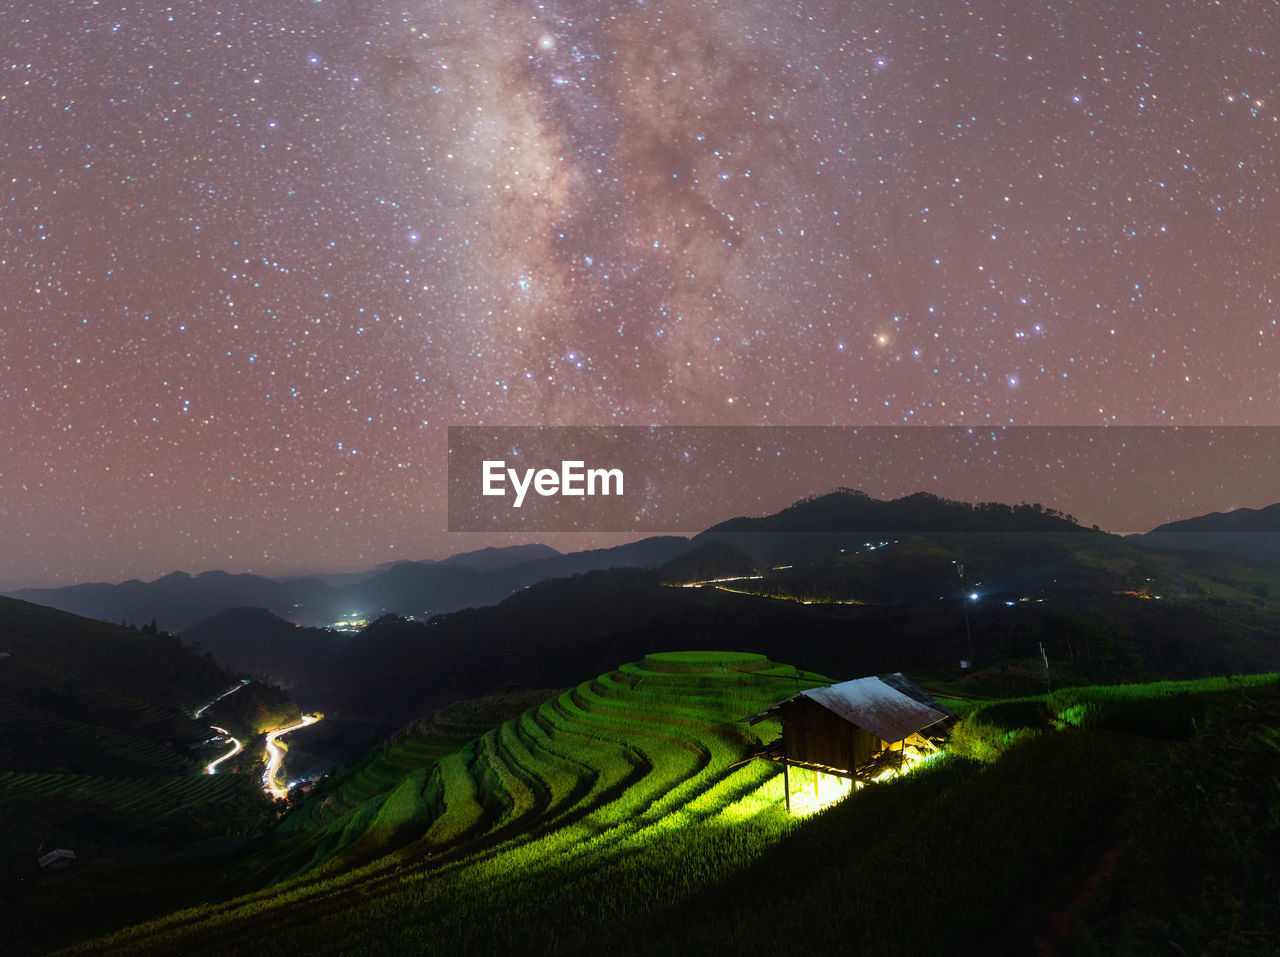 Milky way over terrace ricefield at night,vietnam 